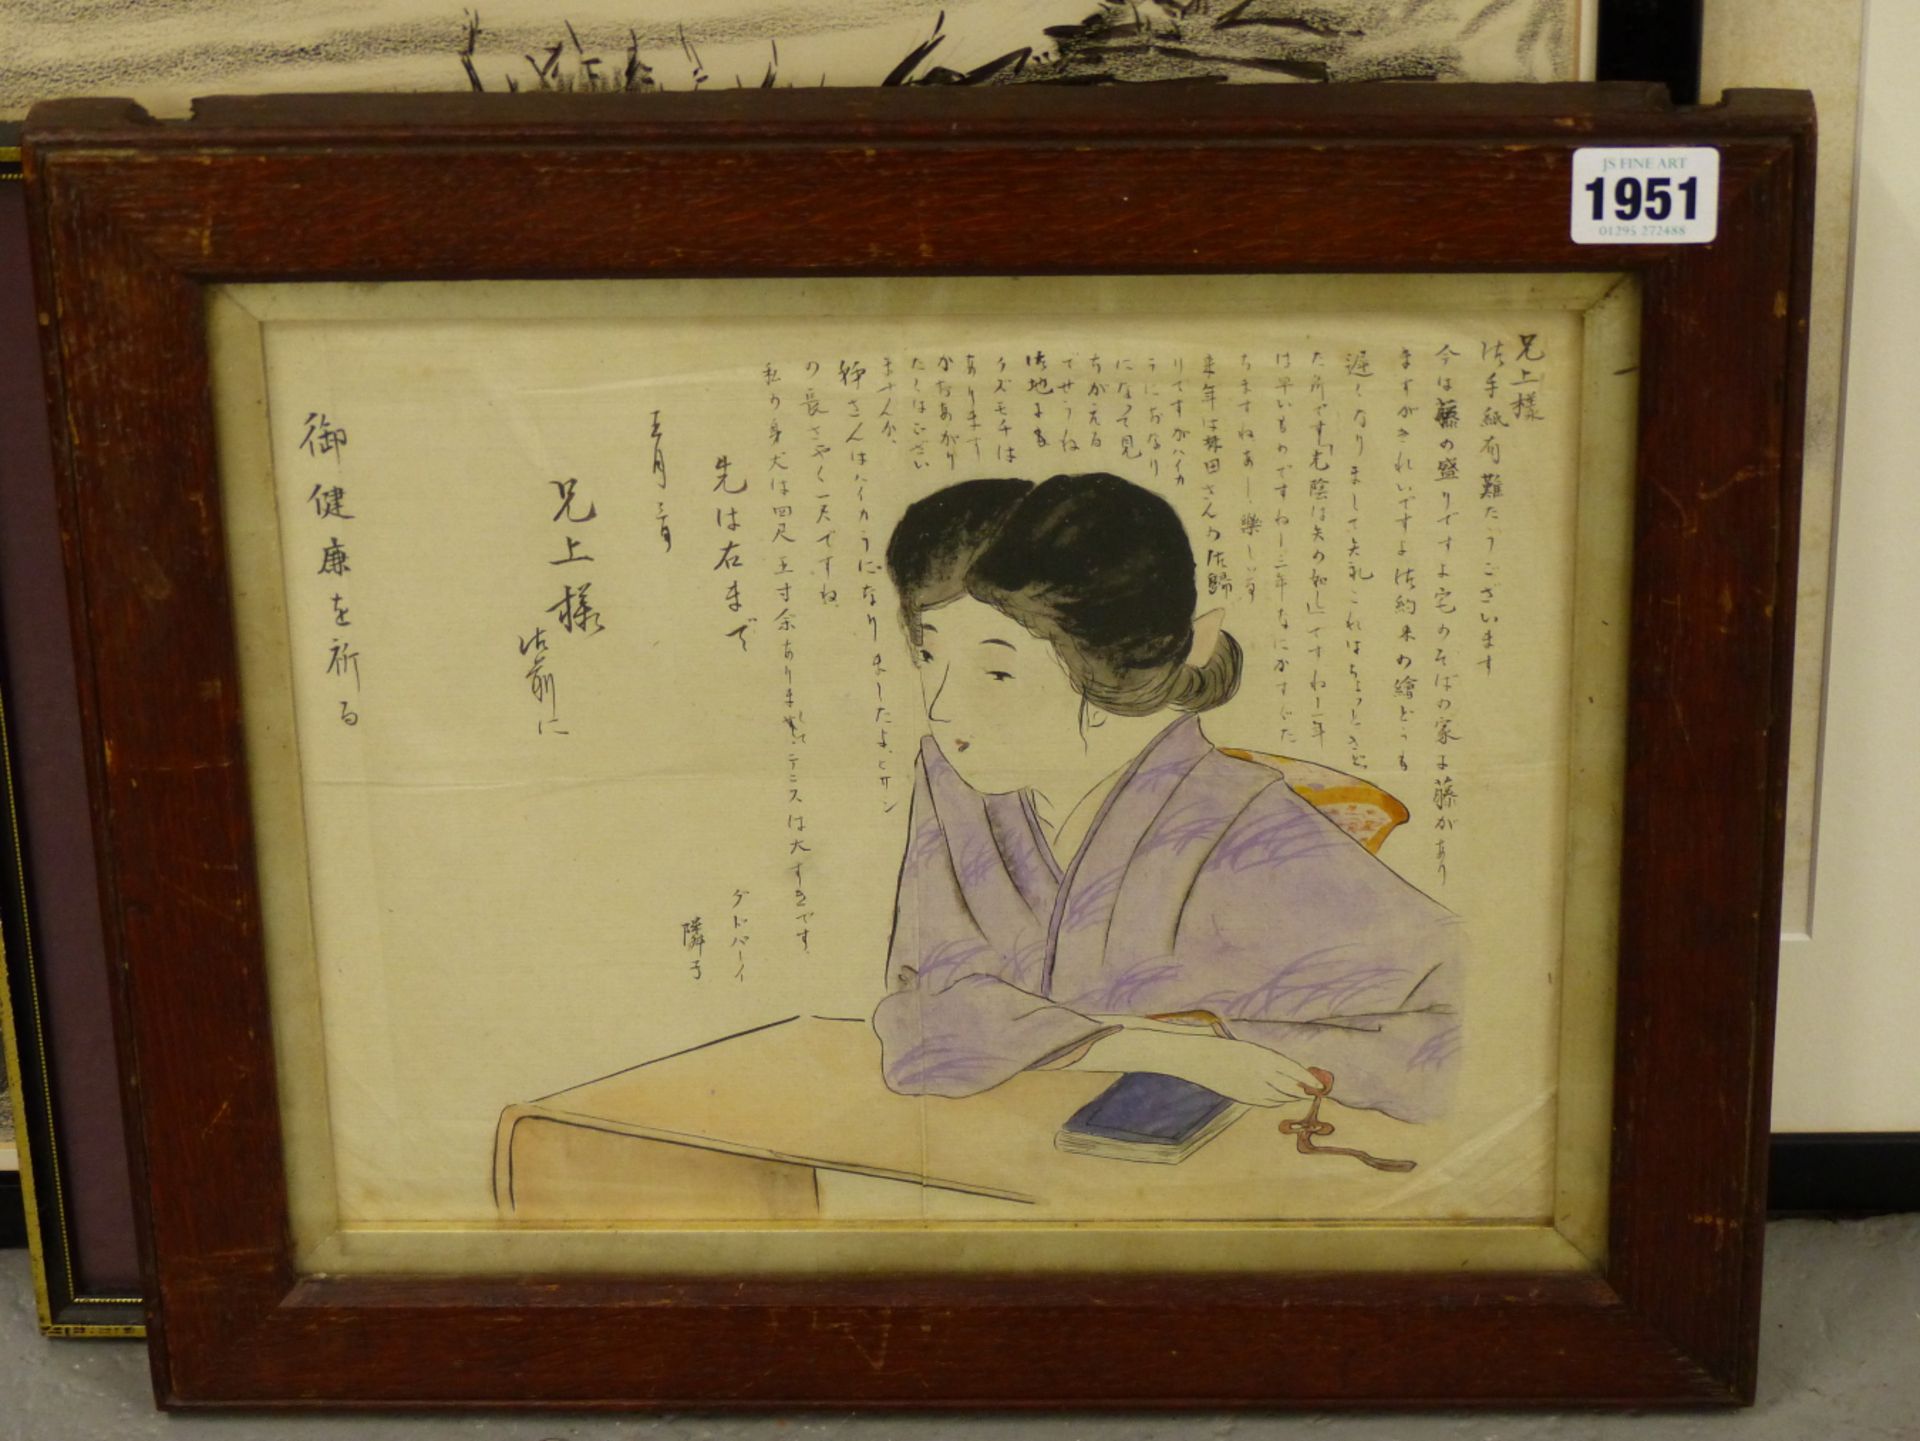 ORIENTAL SCHOOL, 19THC. YOUNG GIRL AT STUDY WITH ASSOCIATED KANJI TEXT. INK AND WASH ON THIN RICE - Image 3 of 4